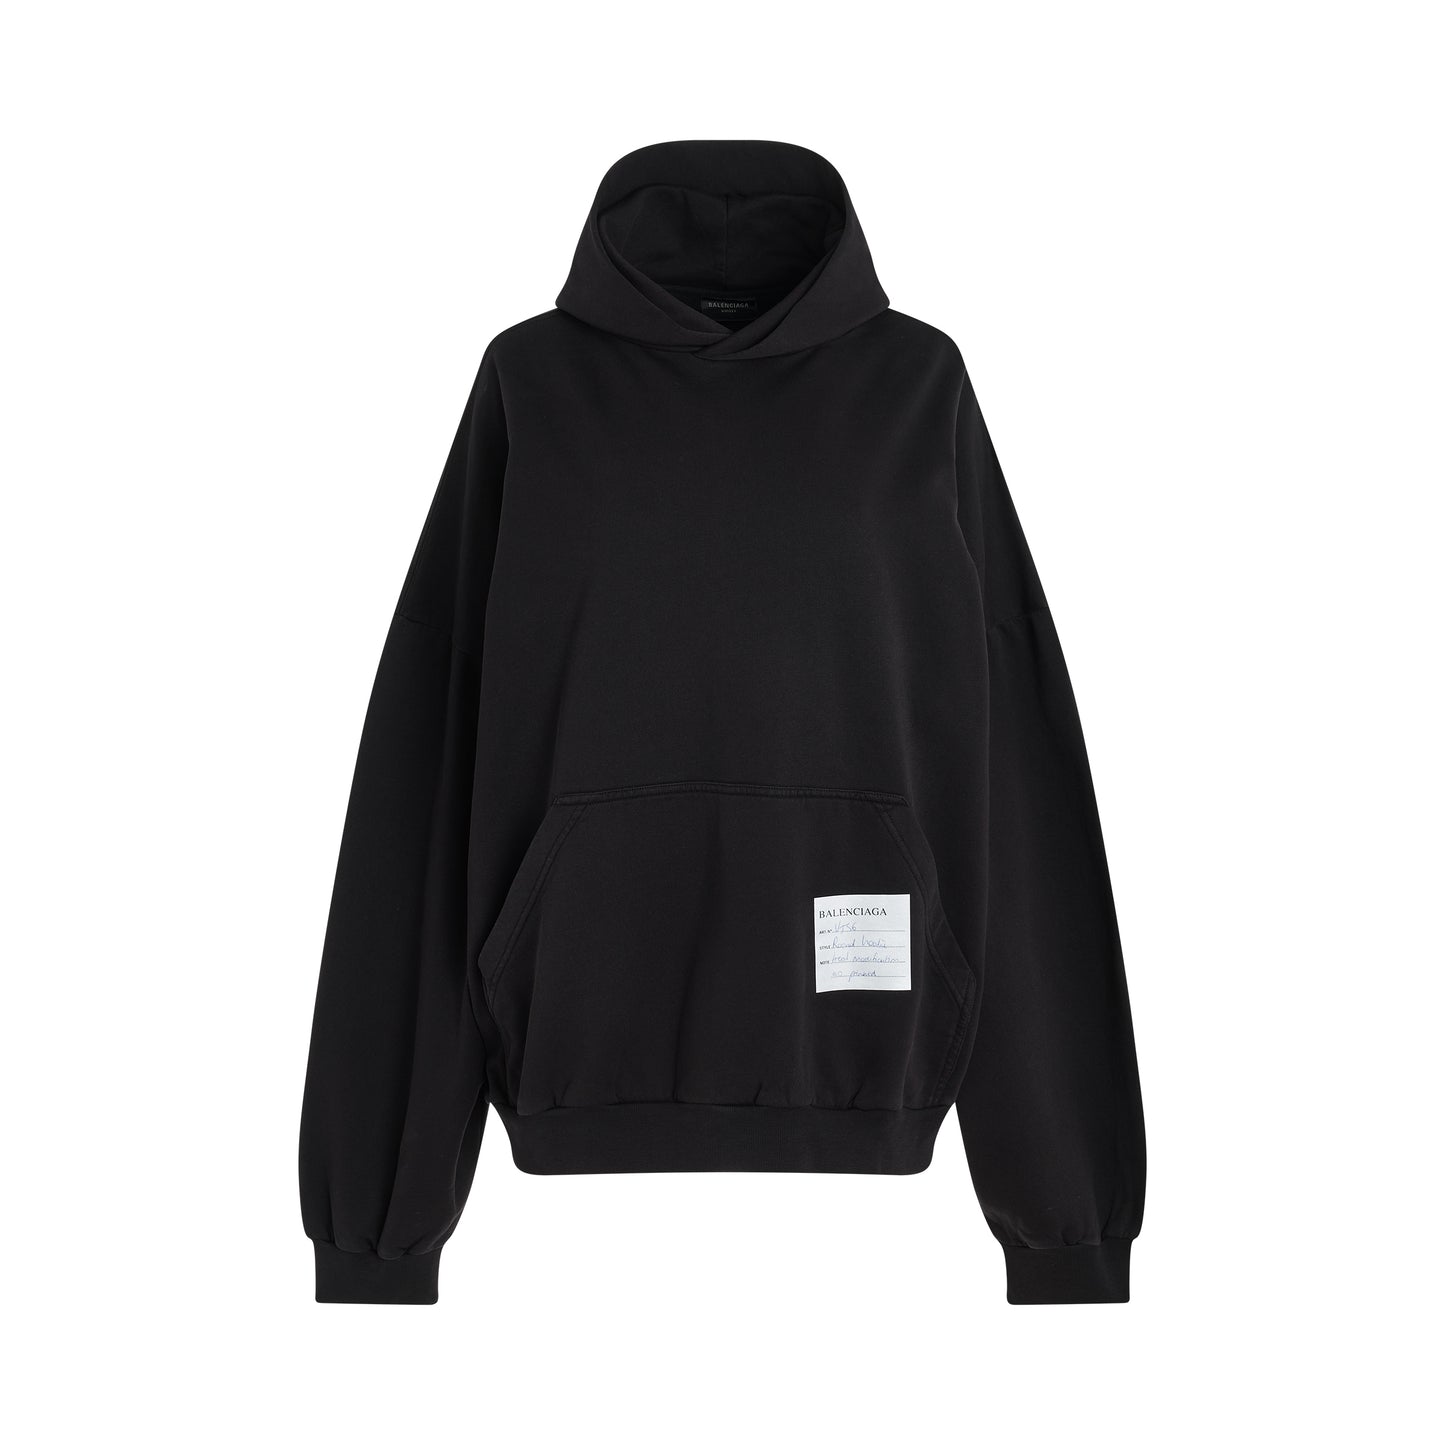 Sample Sticker Round Hoodie in Charcoal